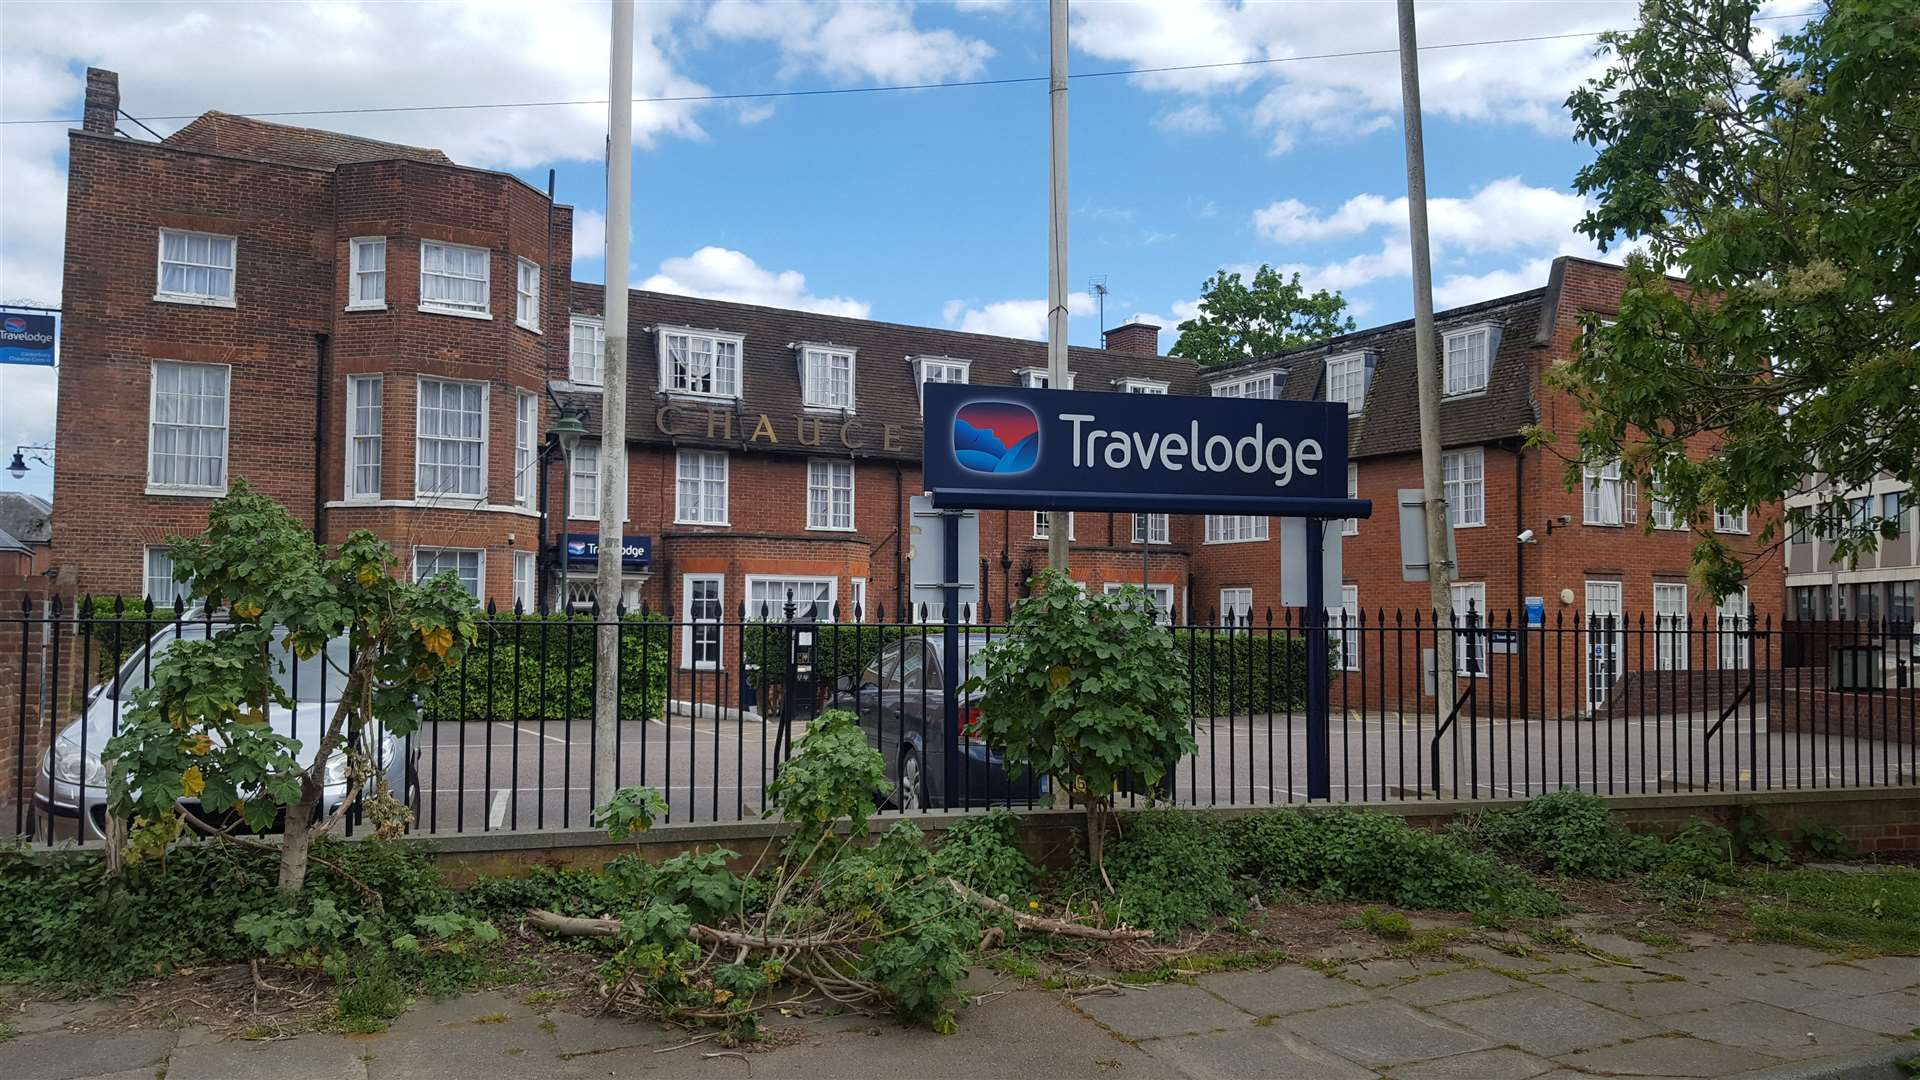 A total of 57 rough sleepers from the Canterbury and Dover districts have been put up in the Travelodge in Ivy Lane, Canterbury